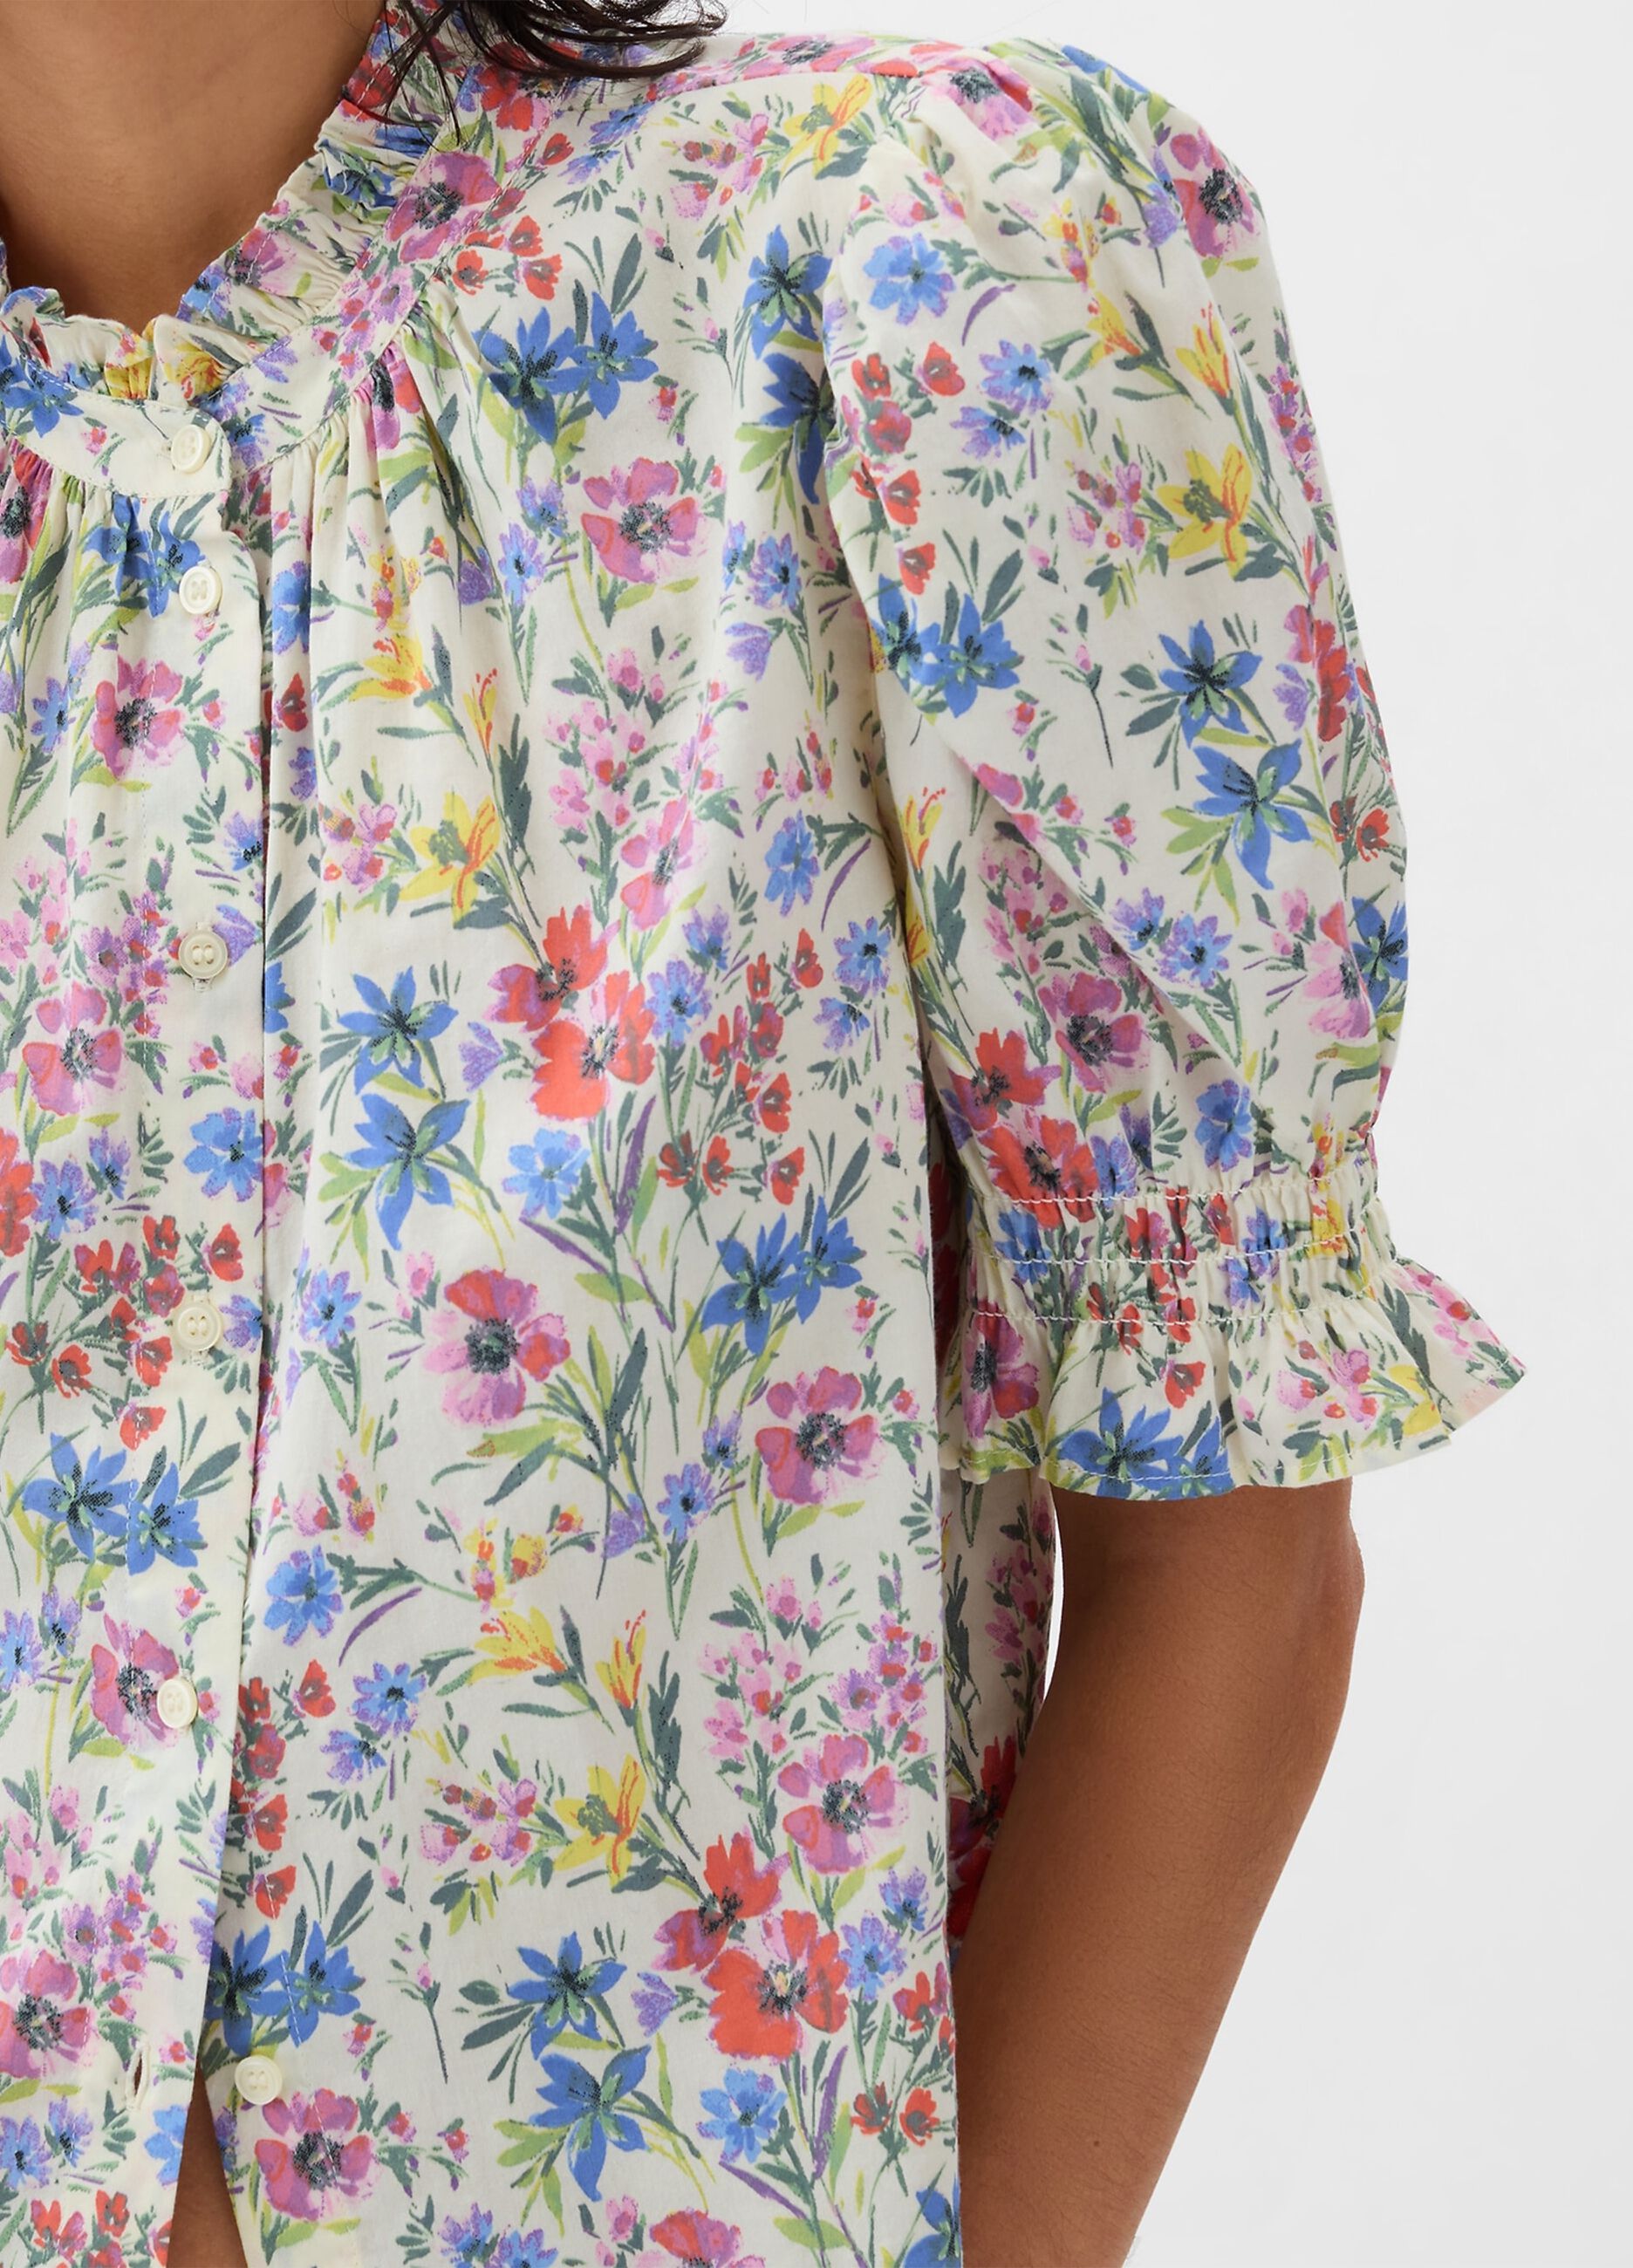 Floral blouse with puffed sleeves